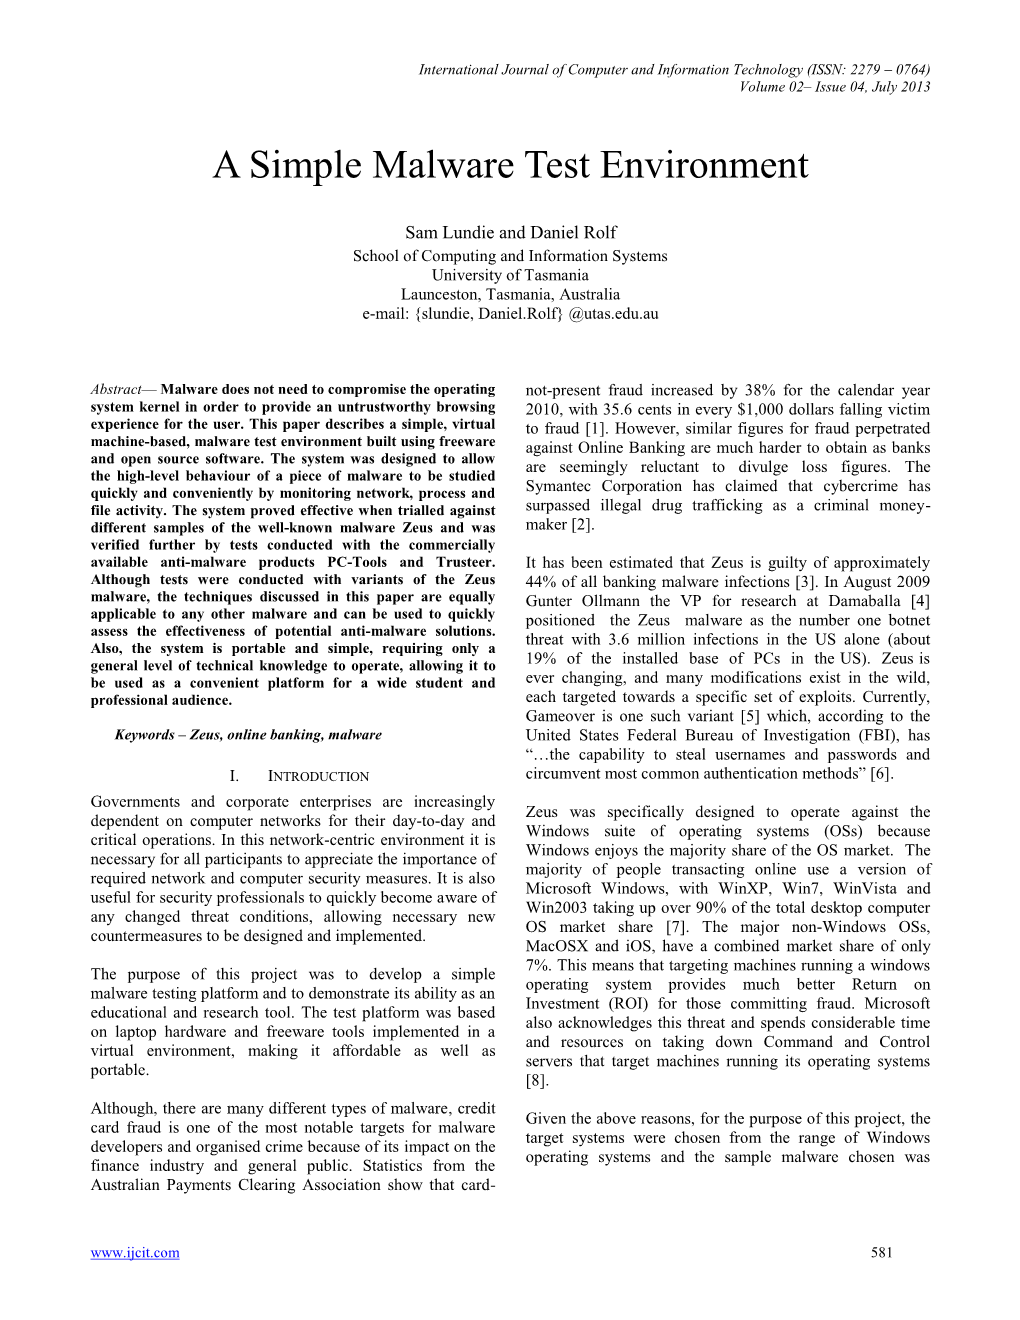 A Simple Malware Test Environment